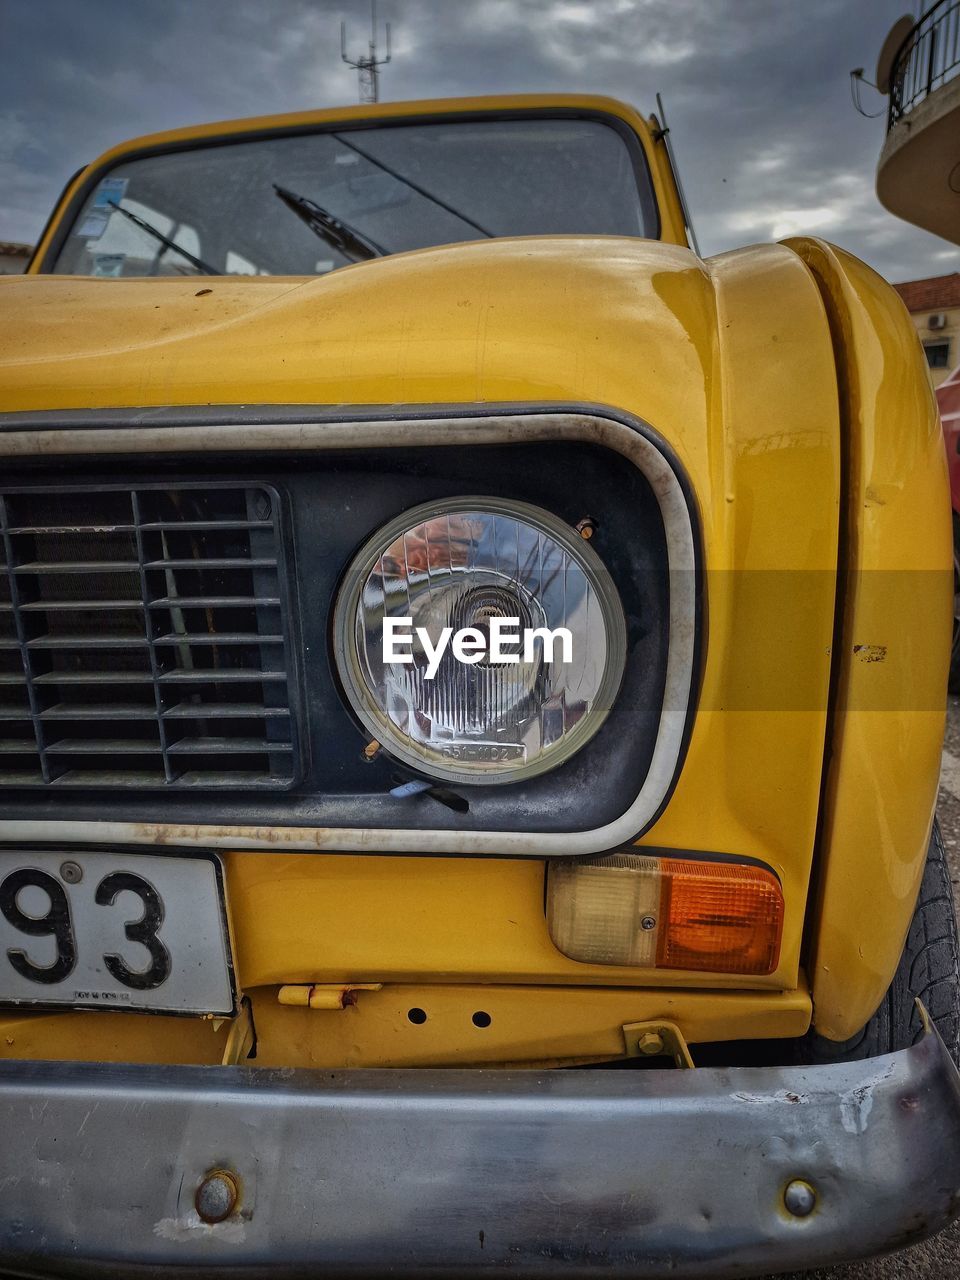 mode of transportation, car, transportation, vehicle, yellow, motor vehicle, land vehicle, retro styled, headlight, vintage car, cloud, automotive exterior, sky, antique car, no people, bumper, old, the past, day, front view, history, outdoors, metal, taxi